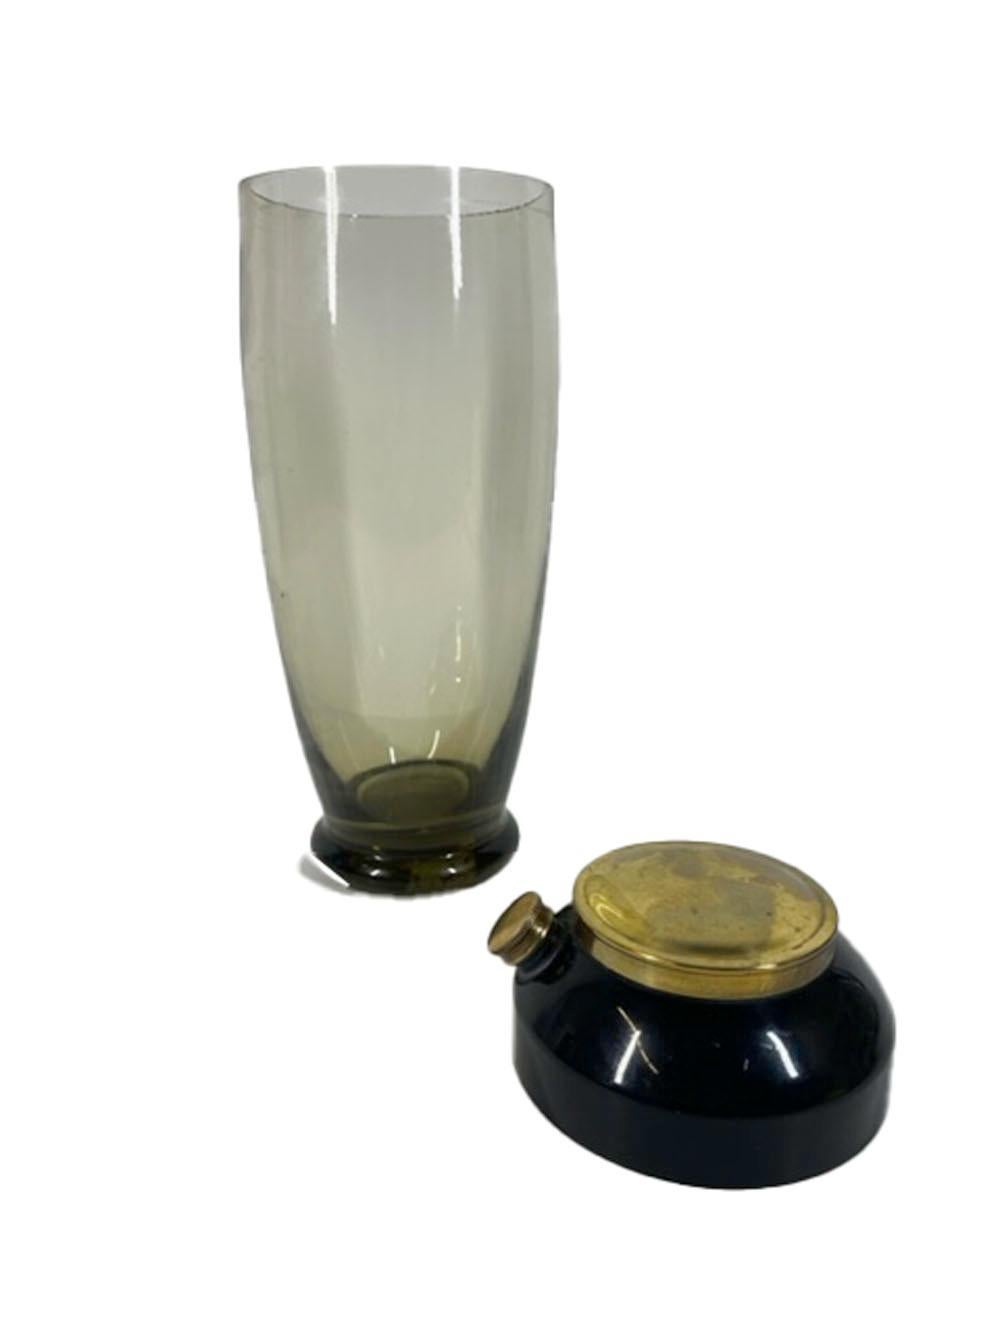 Art Deco Cocktail Shaker, Pale Olive Glass, Black Enameled Lid w/Brass Caps In Good Condition For Sale In Nantucket, MA